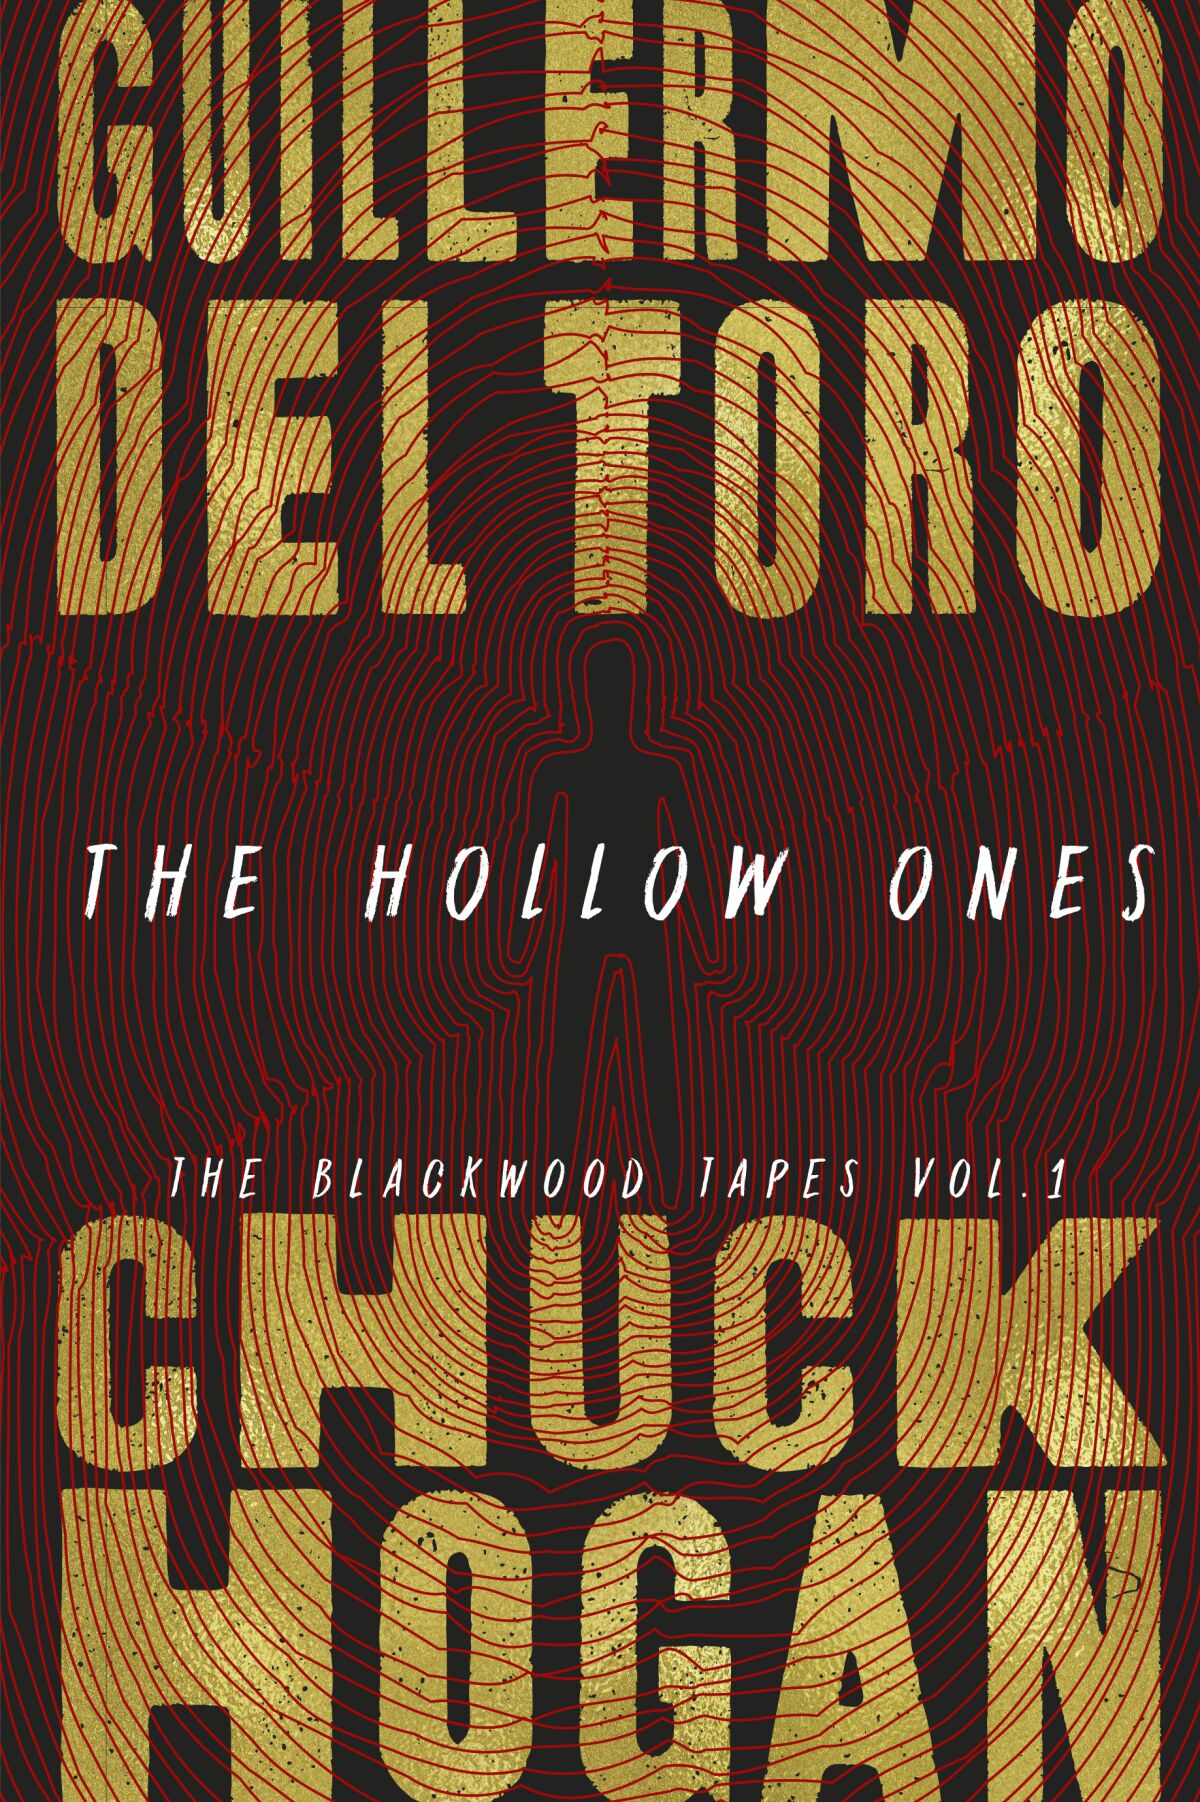 This cover image released by Grand Central Publishing shows "The Hollow Ones" by Guillermo Del Toro and Chuck Hogan. (Grand Central Publishing via AP)